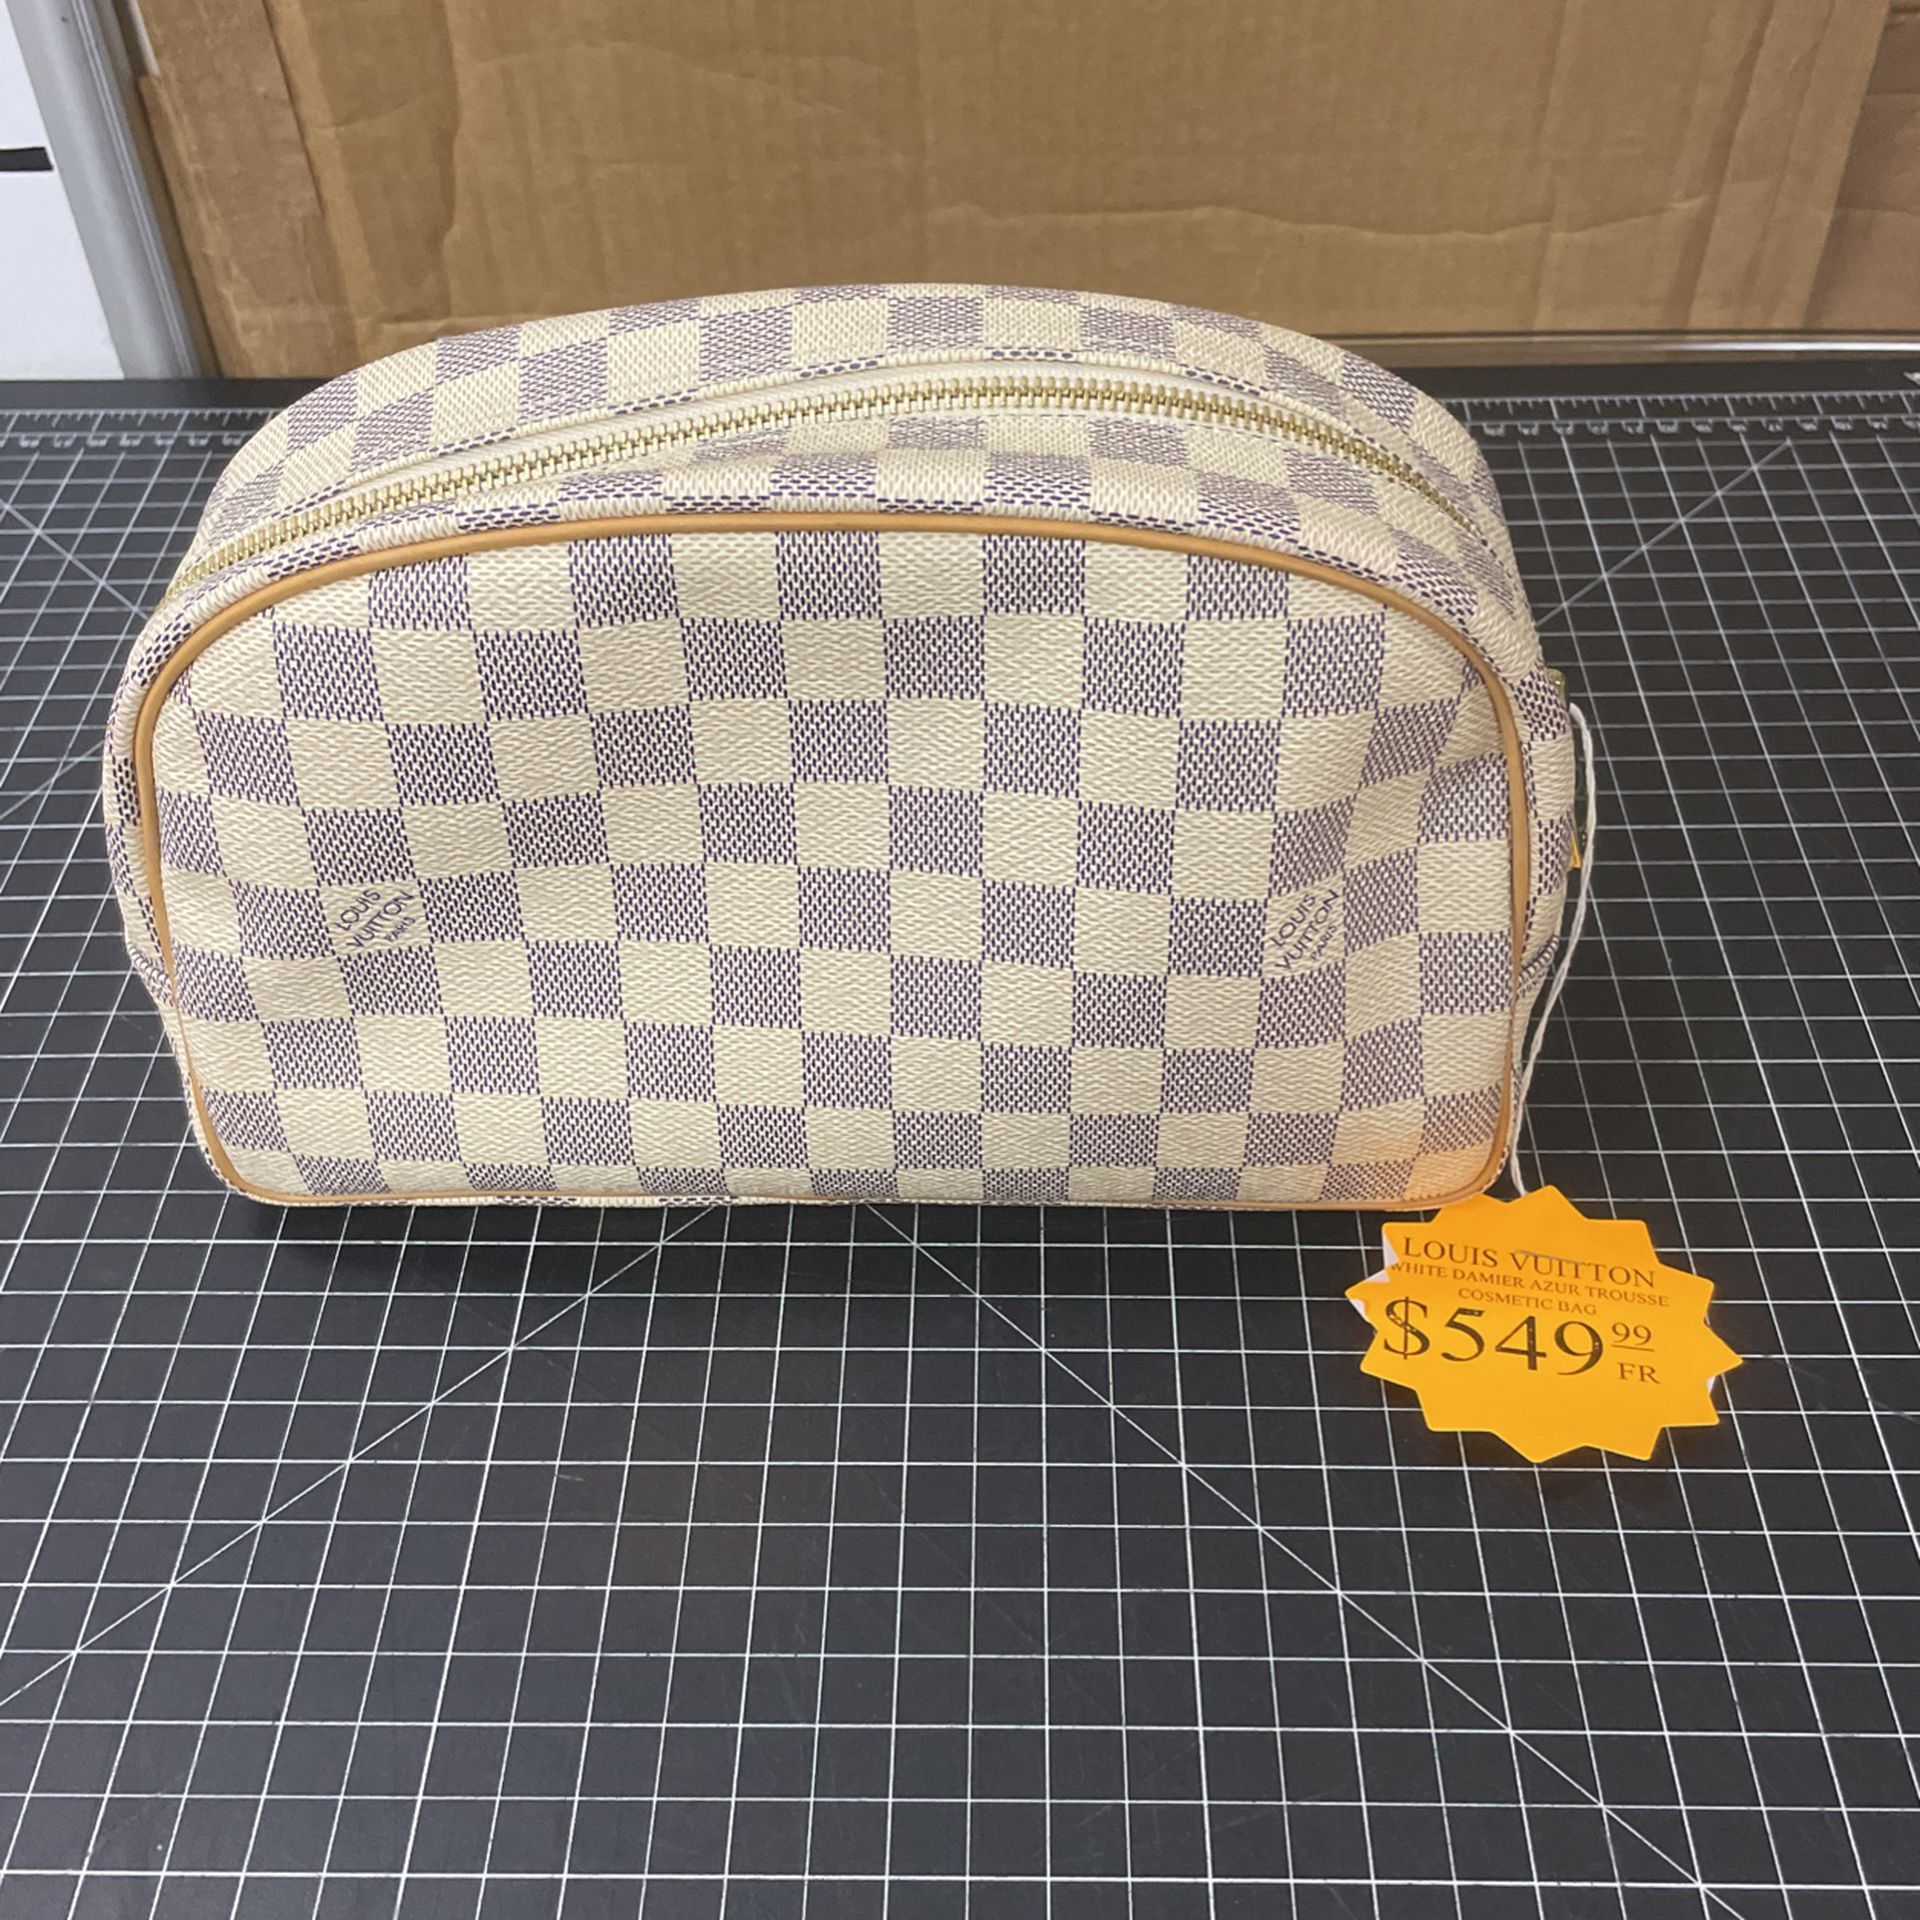 Louis Vuitton Mini Cosmetic bag for Sale in Sumner, WA - OfferUp